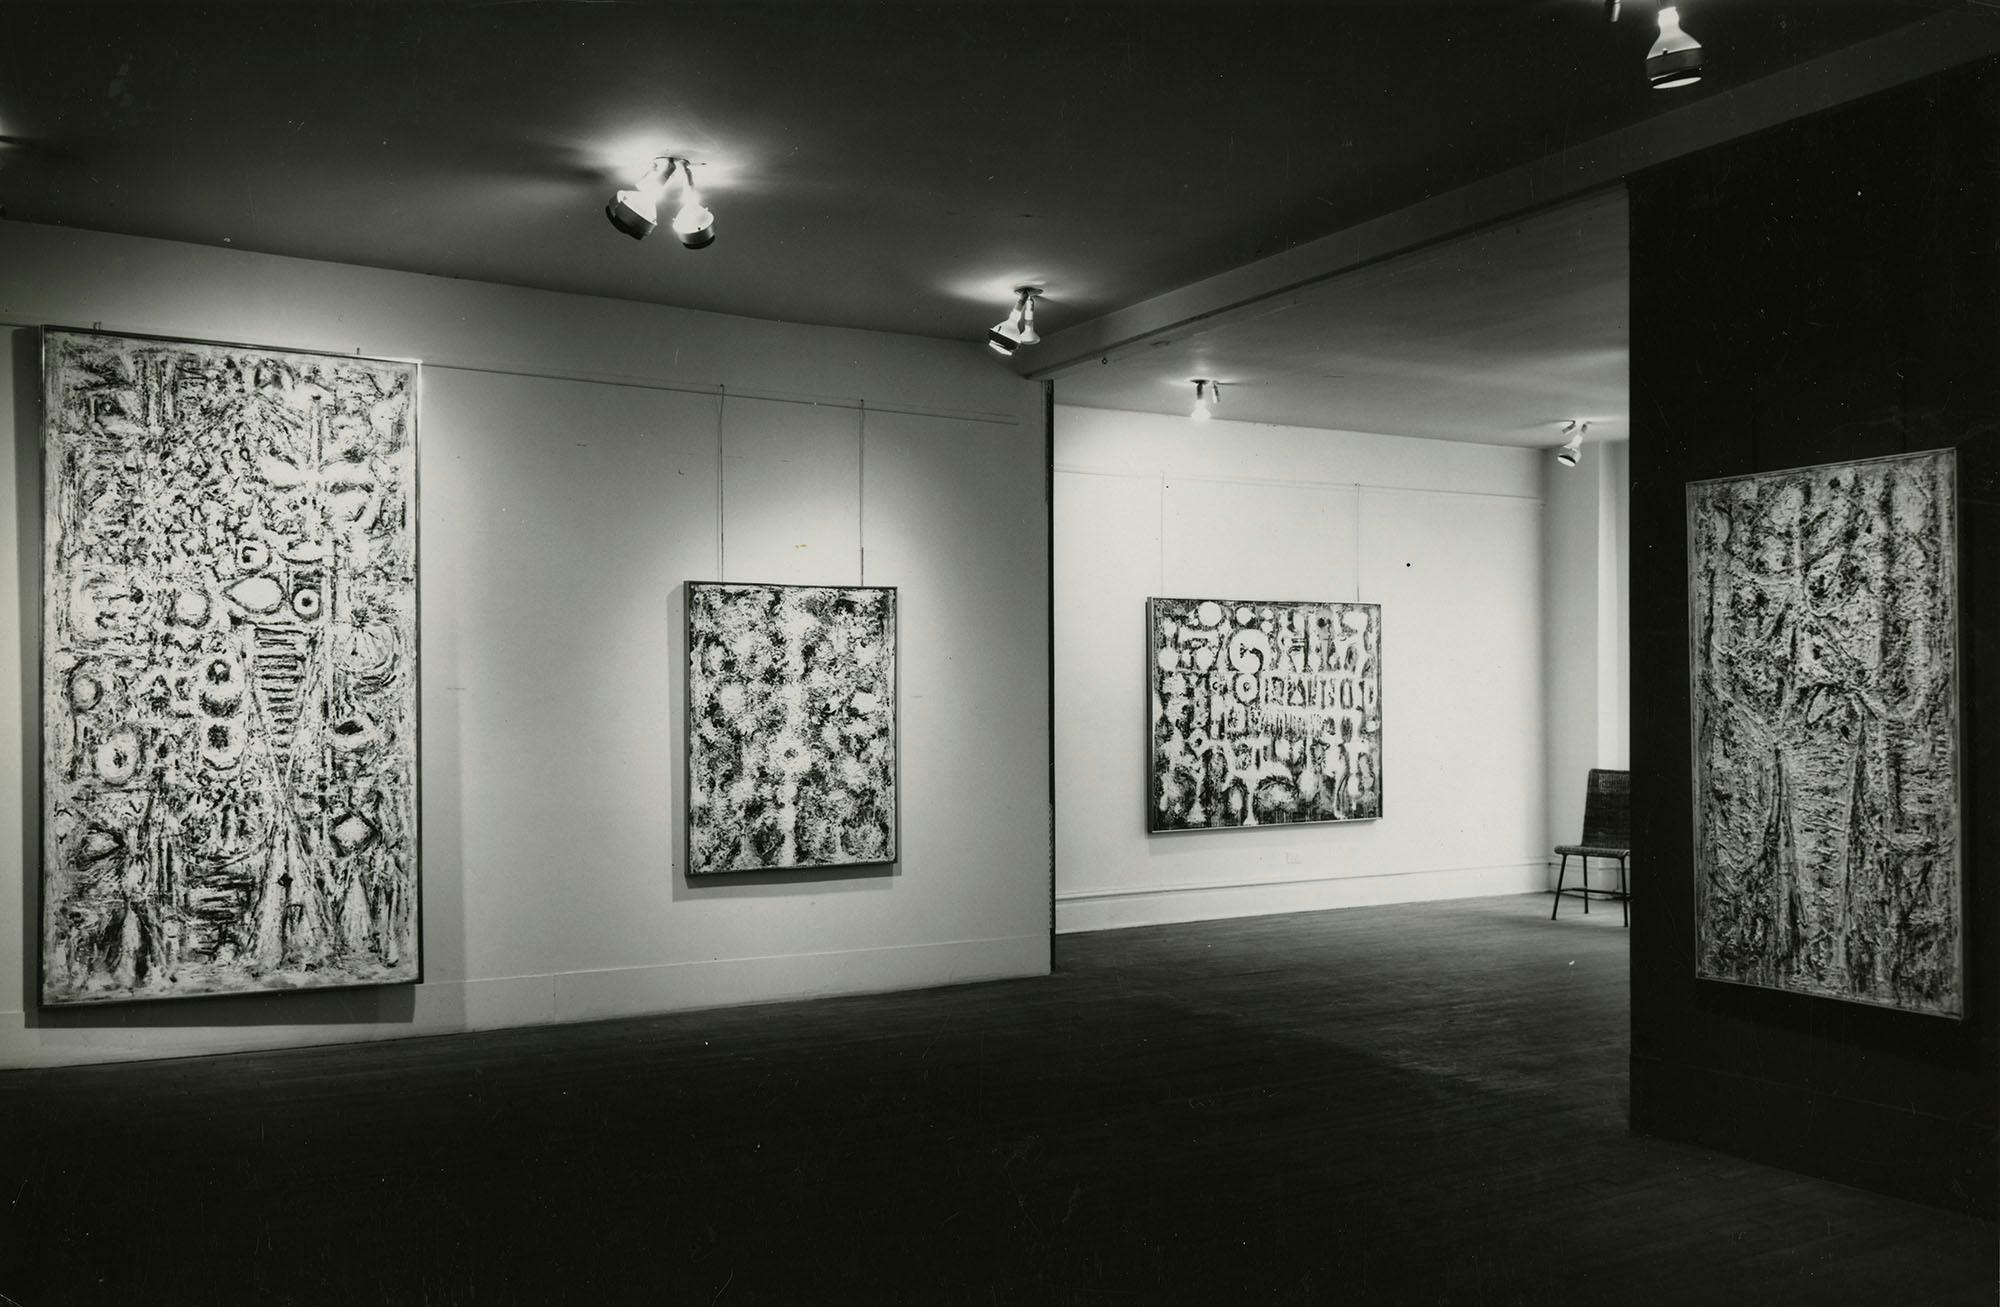 Betty Parsons Gallery, New York, NY, 1951. – The Richard Pousette-Dart Foundation